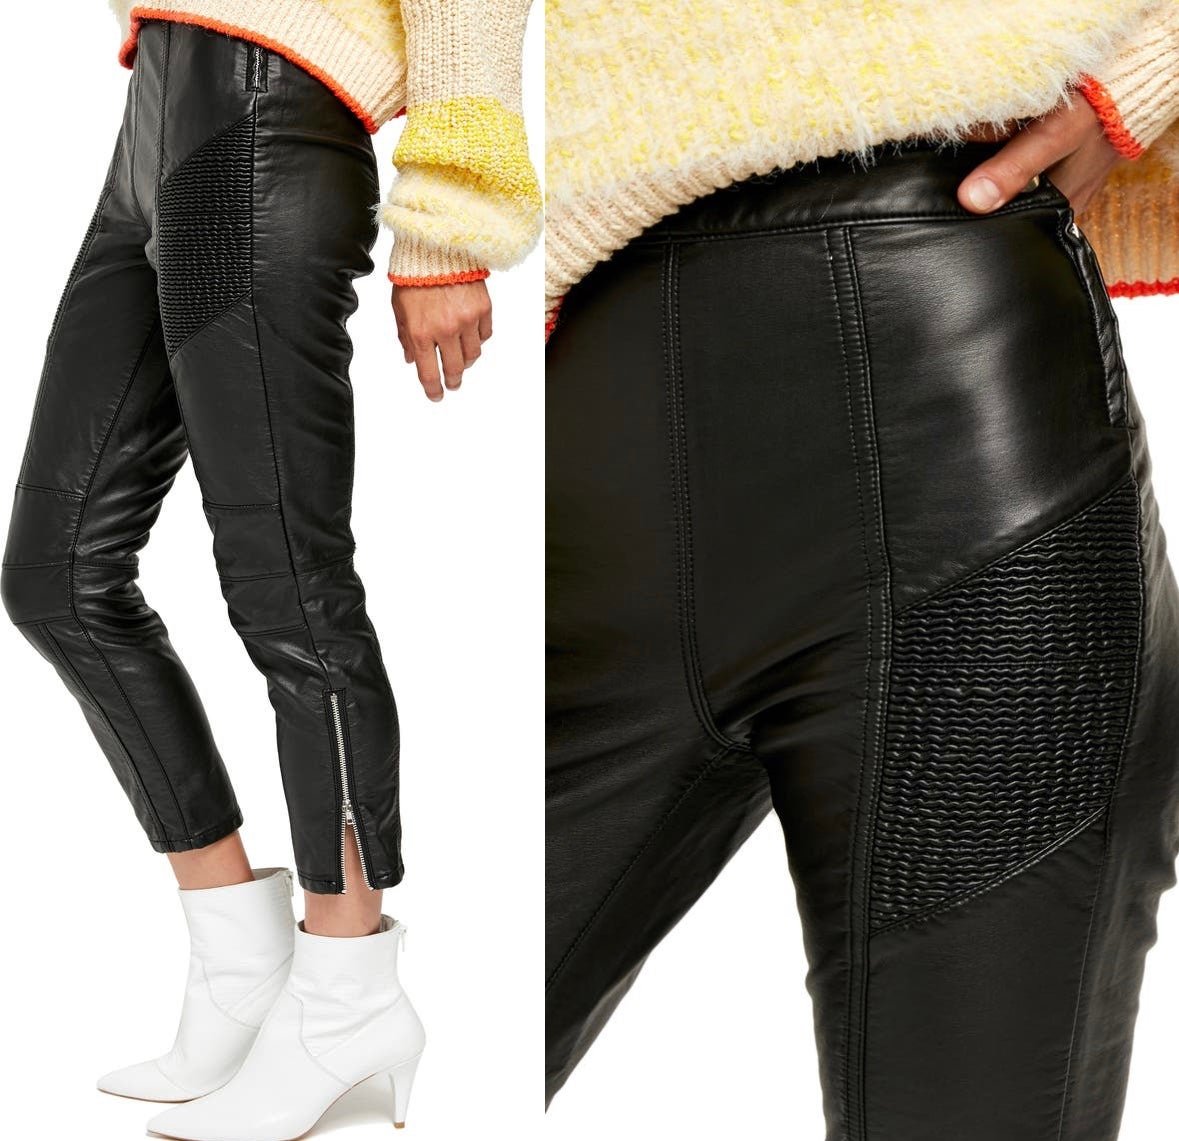 Promotions  Free People Kaelin Faux Leather High Waisted Moto Skinny Pants OzESMh3iy all for you